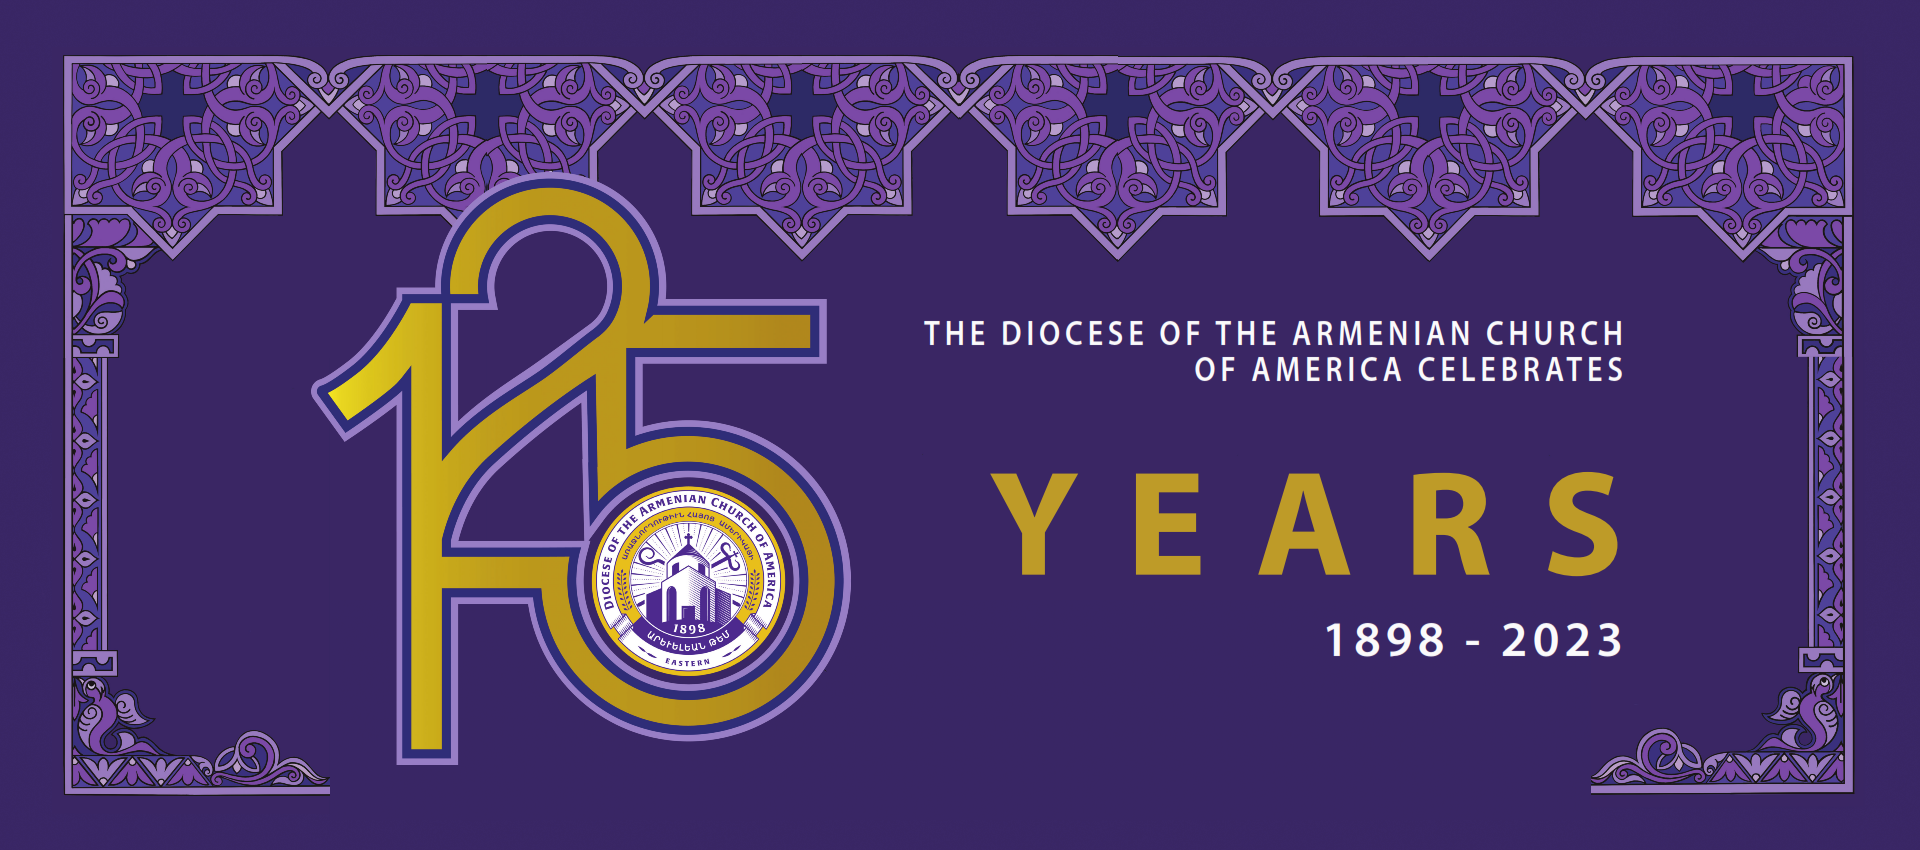 The Diocese of the Armenian Church of America Celebrates 125th Anniversary of Establishment